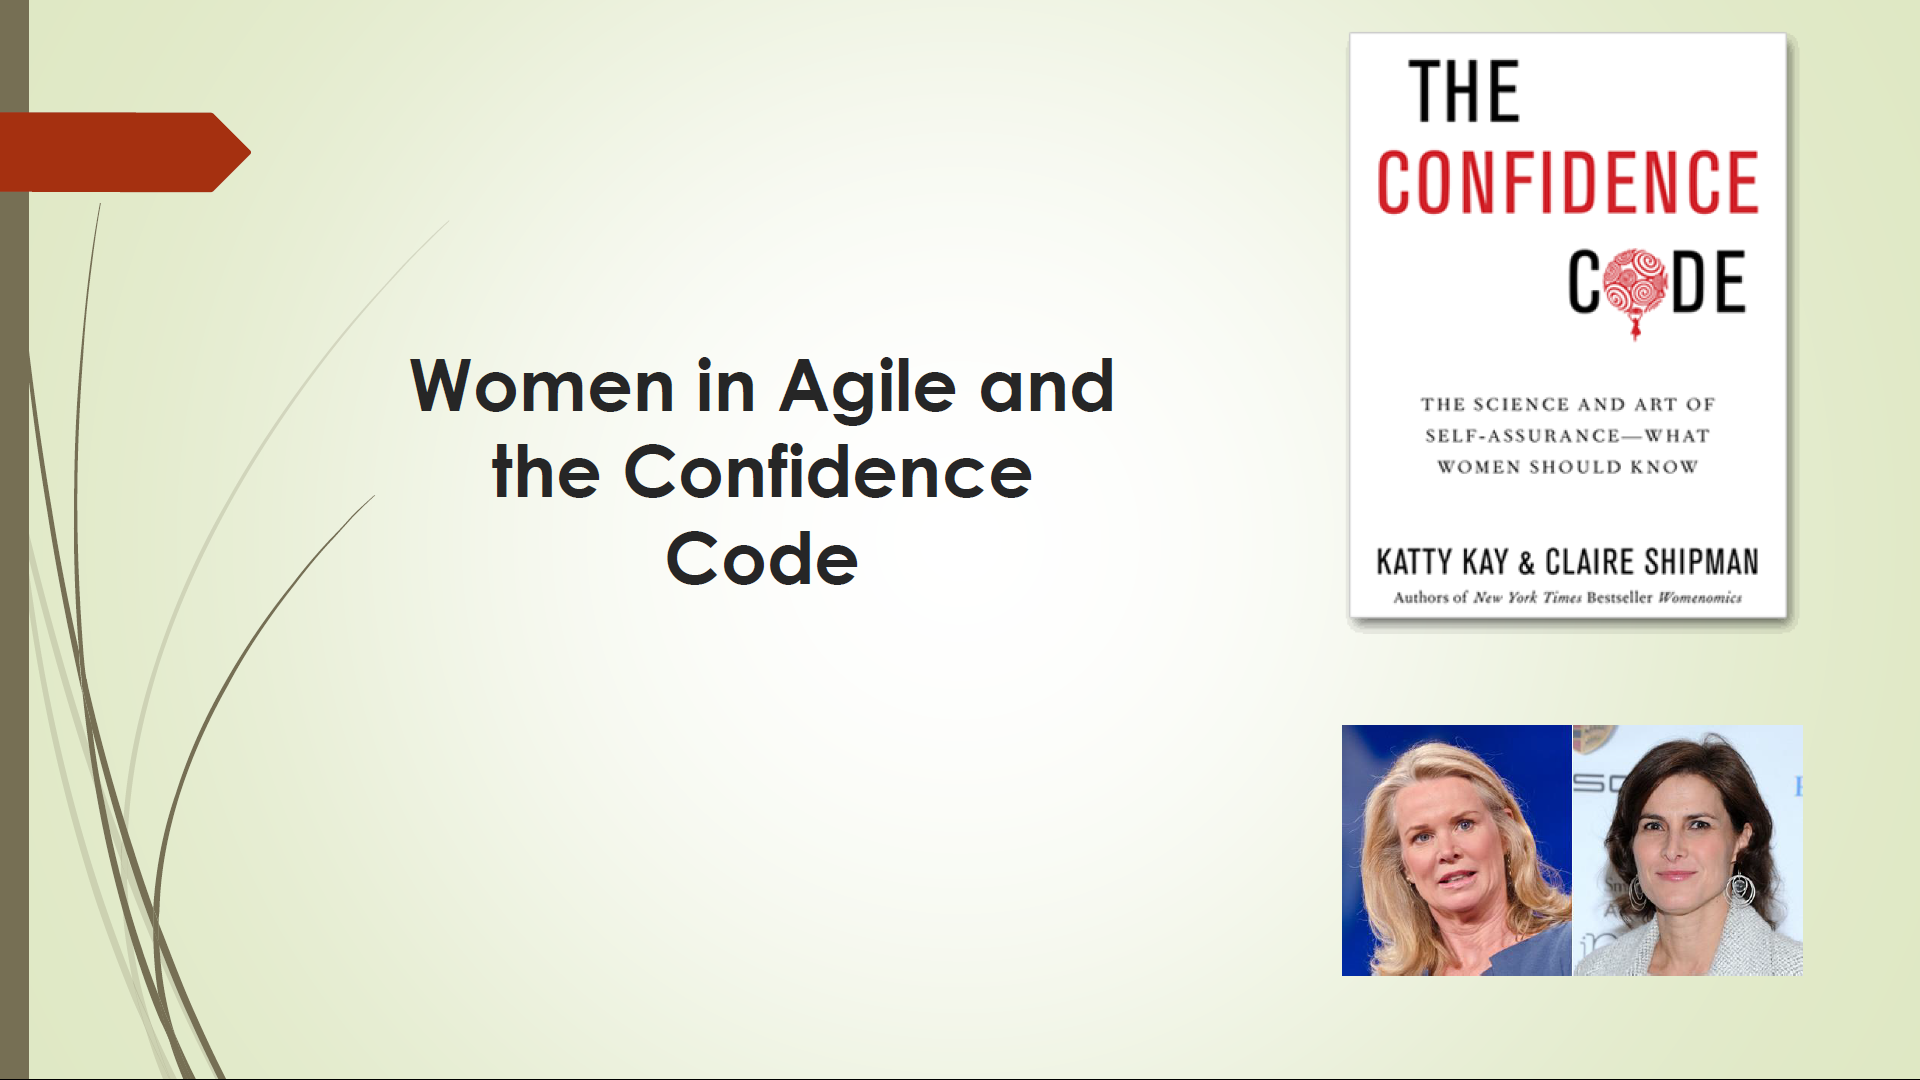 Women in Agile and the Confidence Code